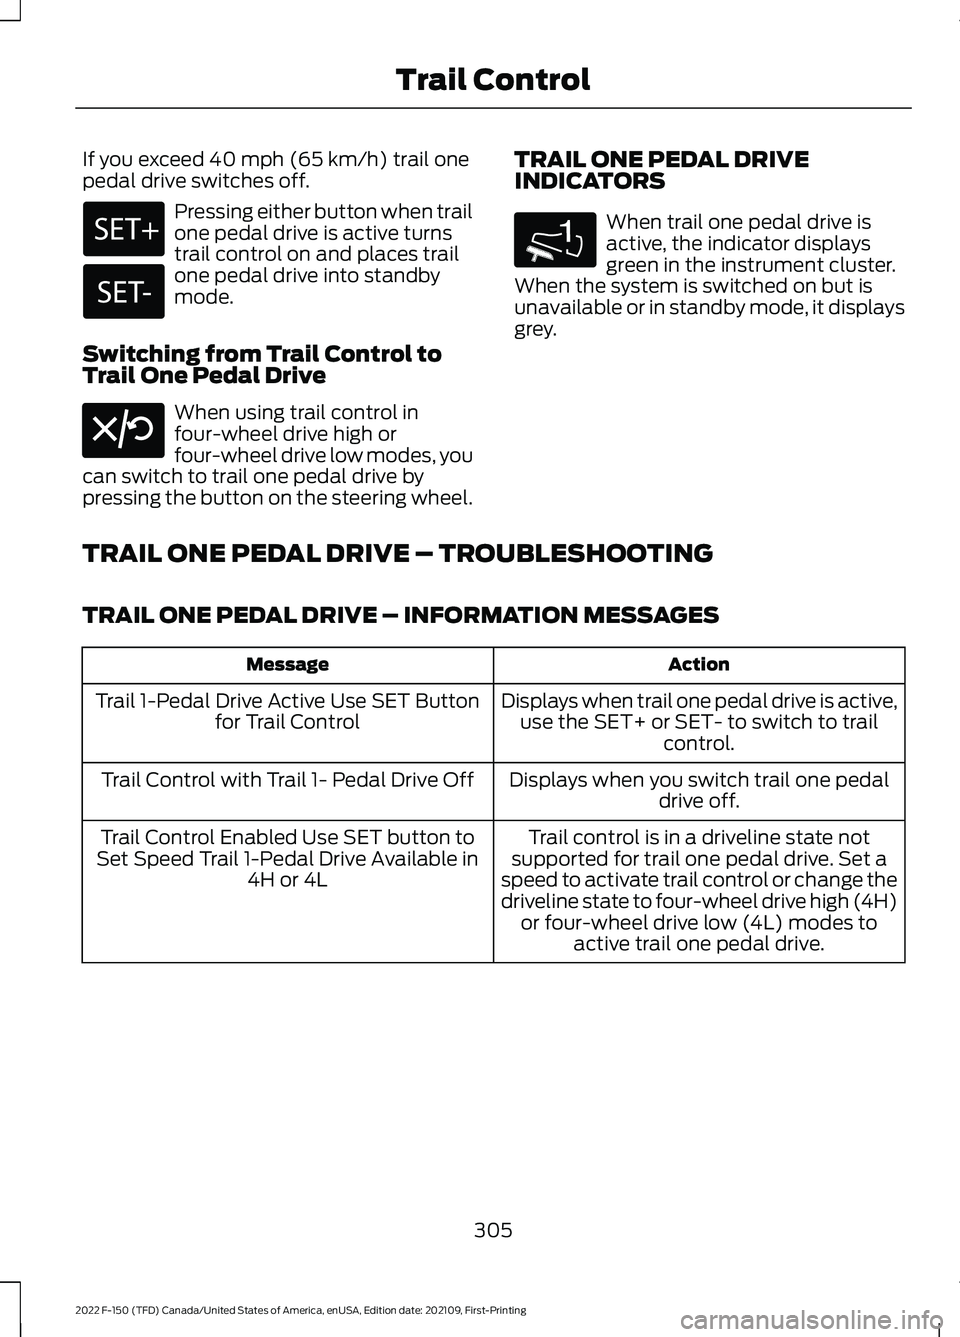 FORD F-150 2022 Owners Guide If you exceed 40 mph (65 km/h) trail one
pedal drive switches off. Pressing either button when trail
one pedal drive is active turns
trail control on and places trail
one pedal drive into standby
mode